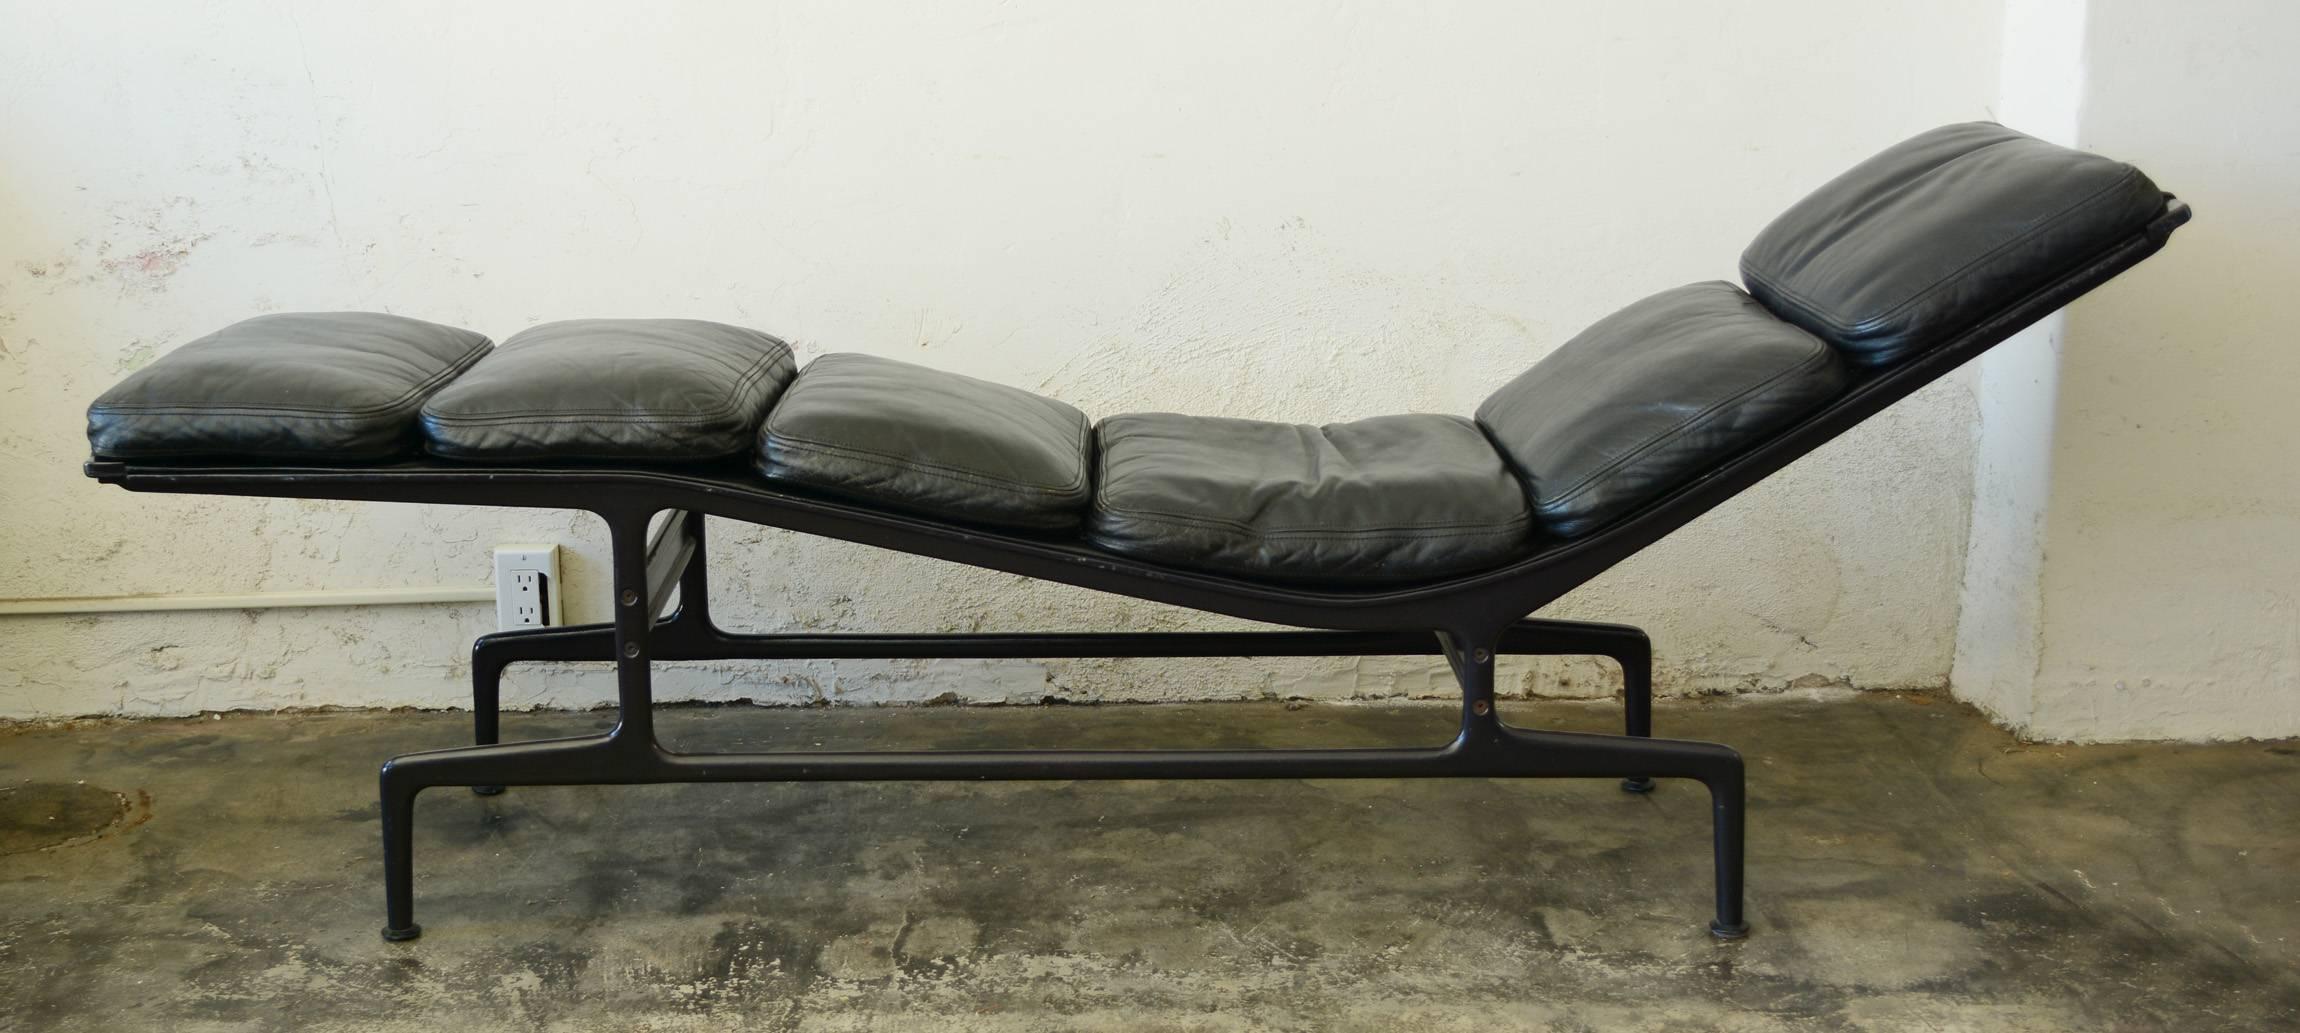 Aluminum Billy Wilder Chaise Lounge by Charles Eames